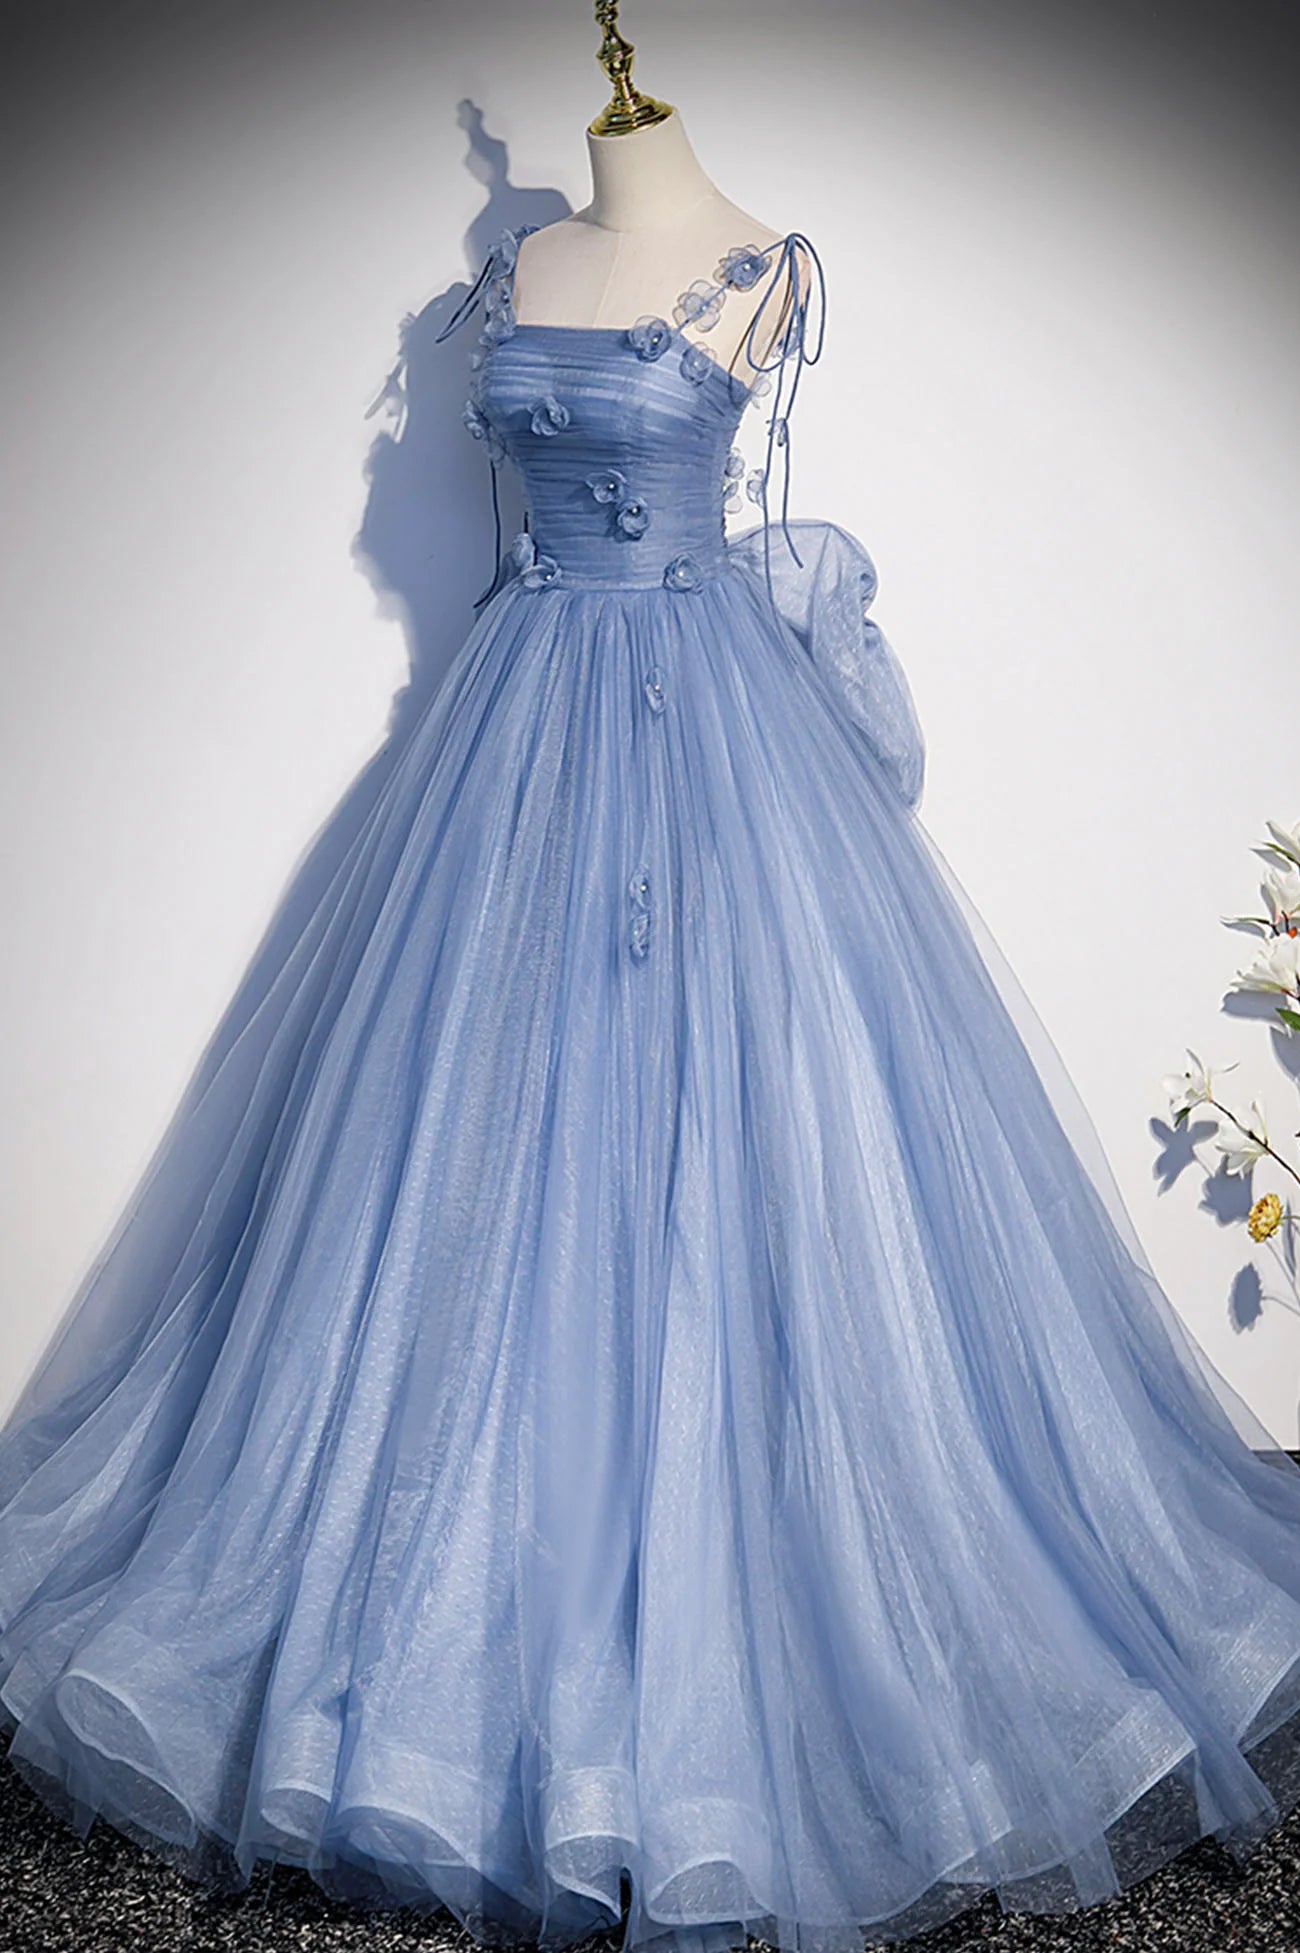 Quinceanera Dress, Blue Spaghetti Strap Tulle with Flowers Long Formal Dress, Blue Party Dress with Bow